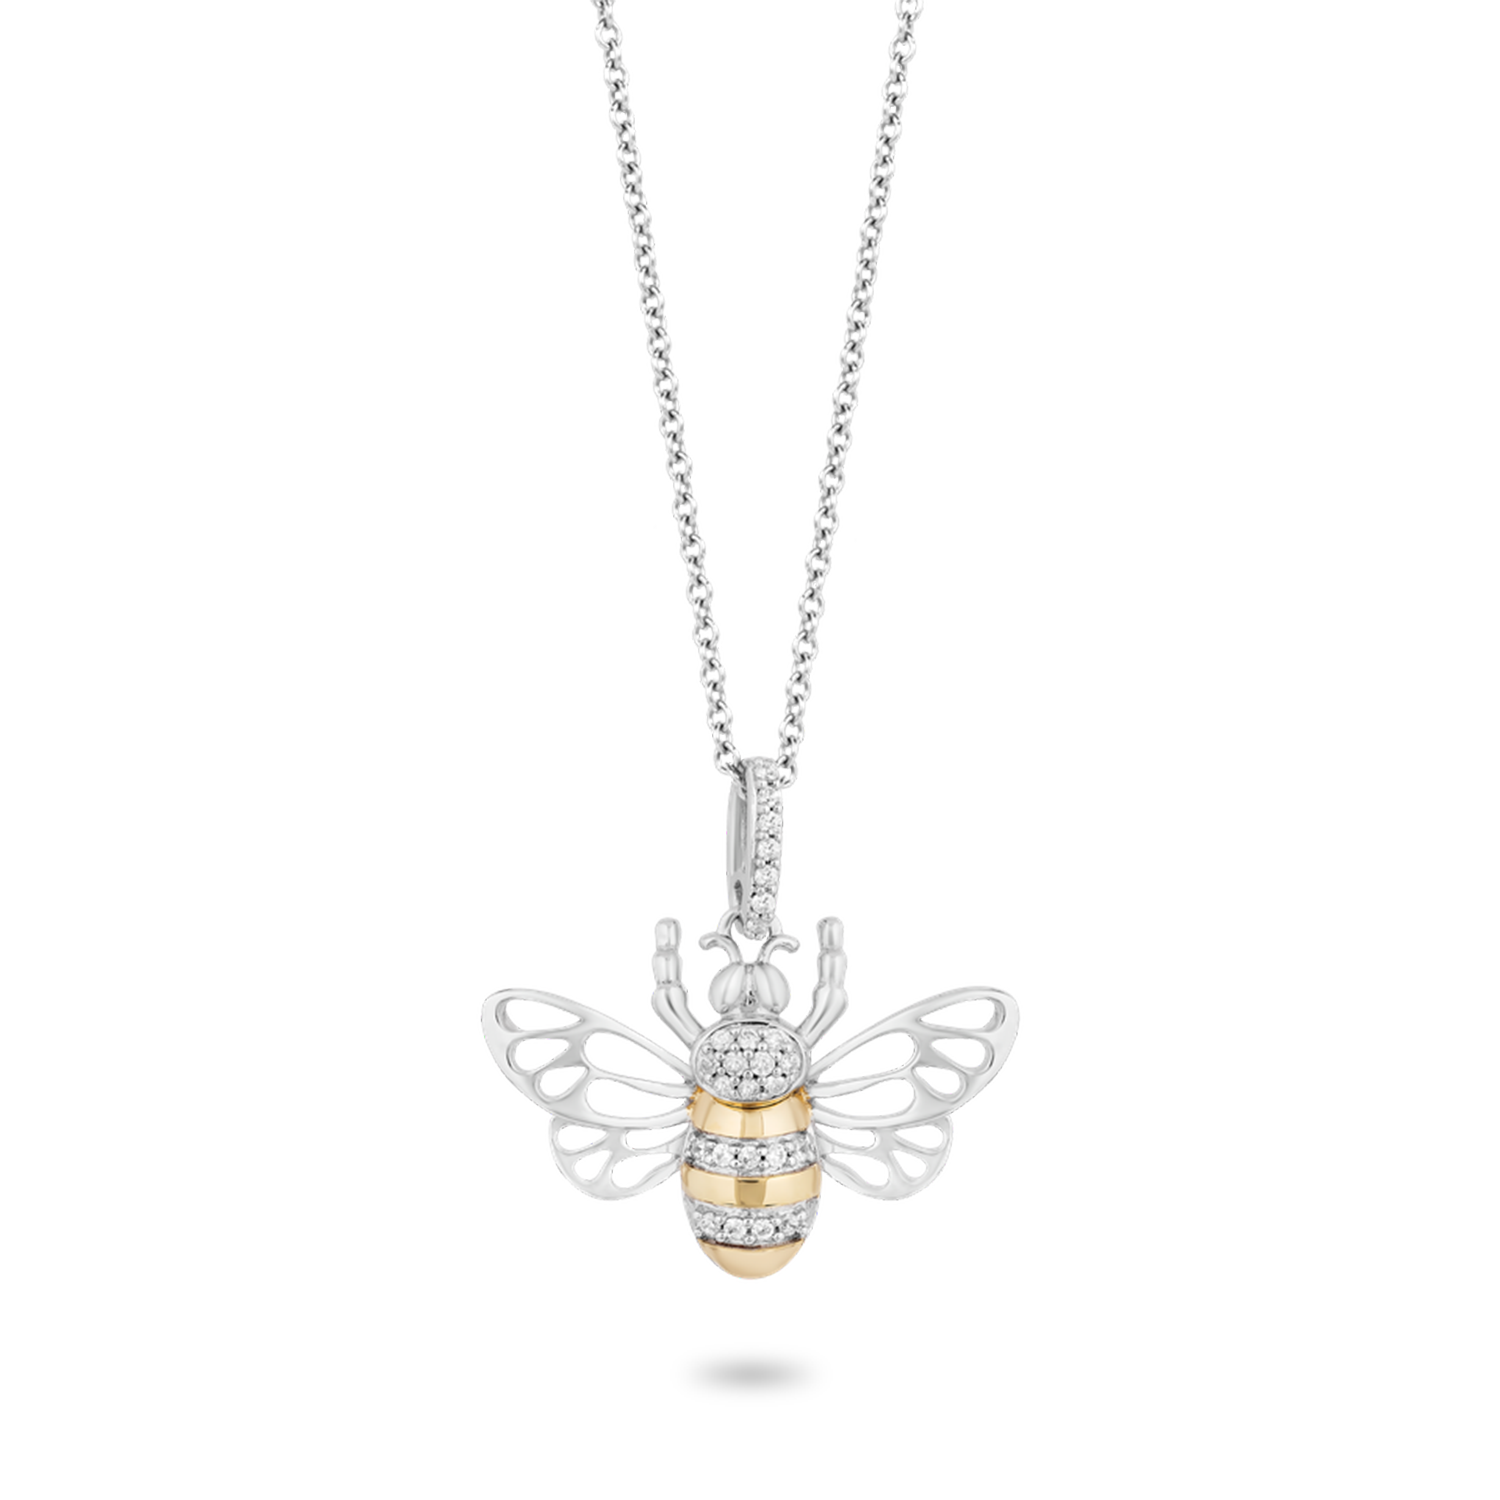 Silver Necklace 30th Anniversary Birthday Bumble Bee Pendant